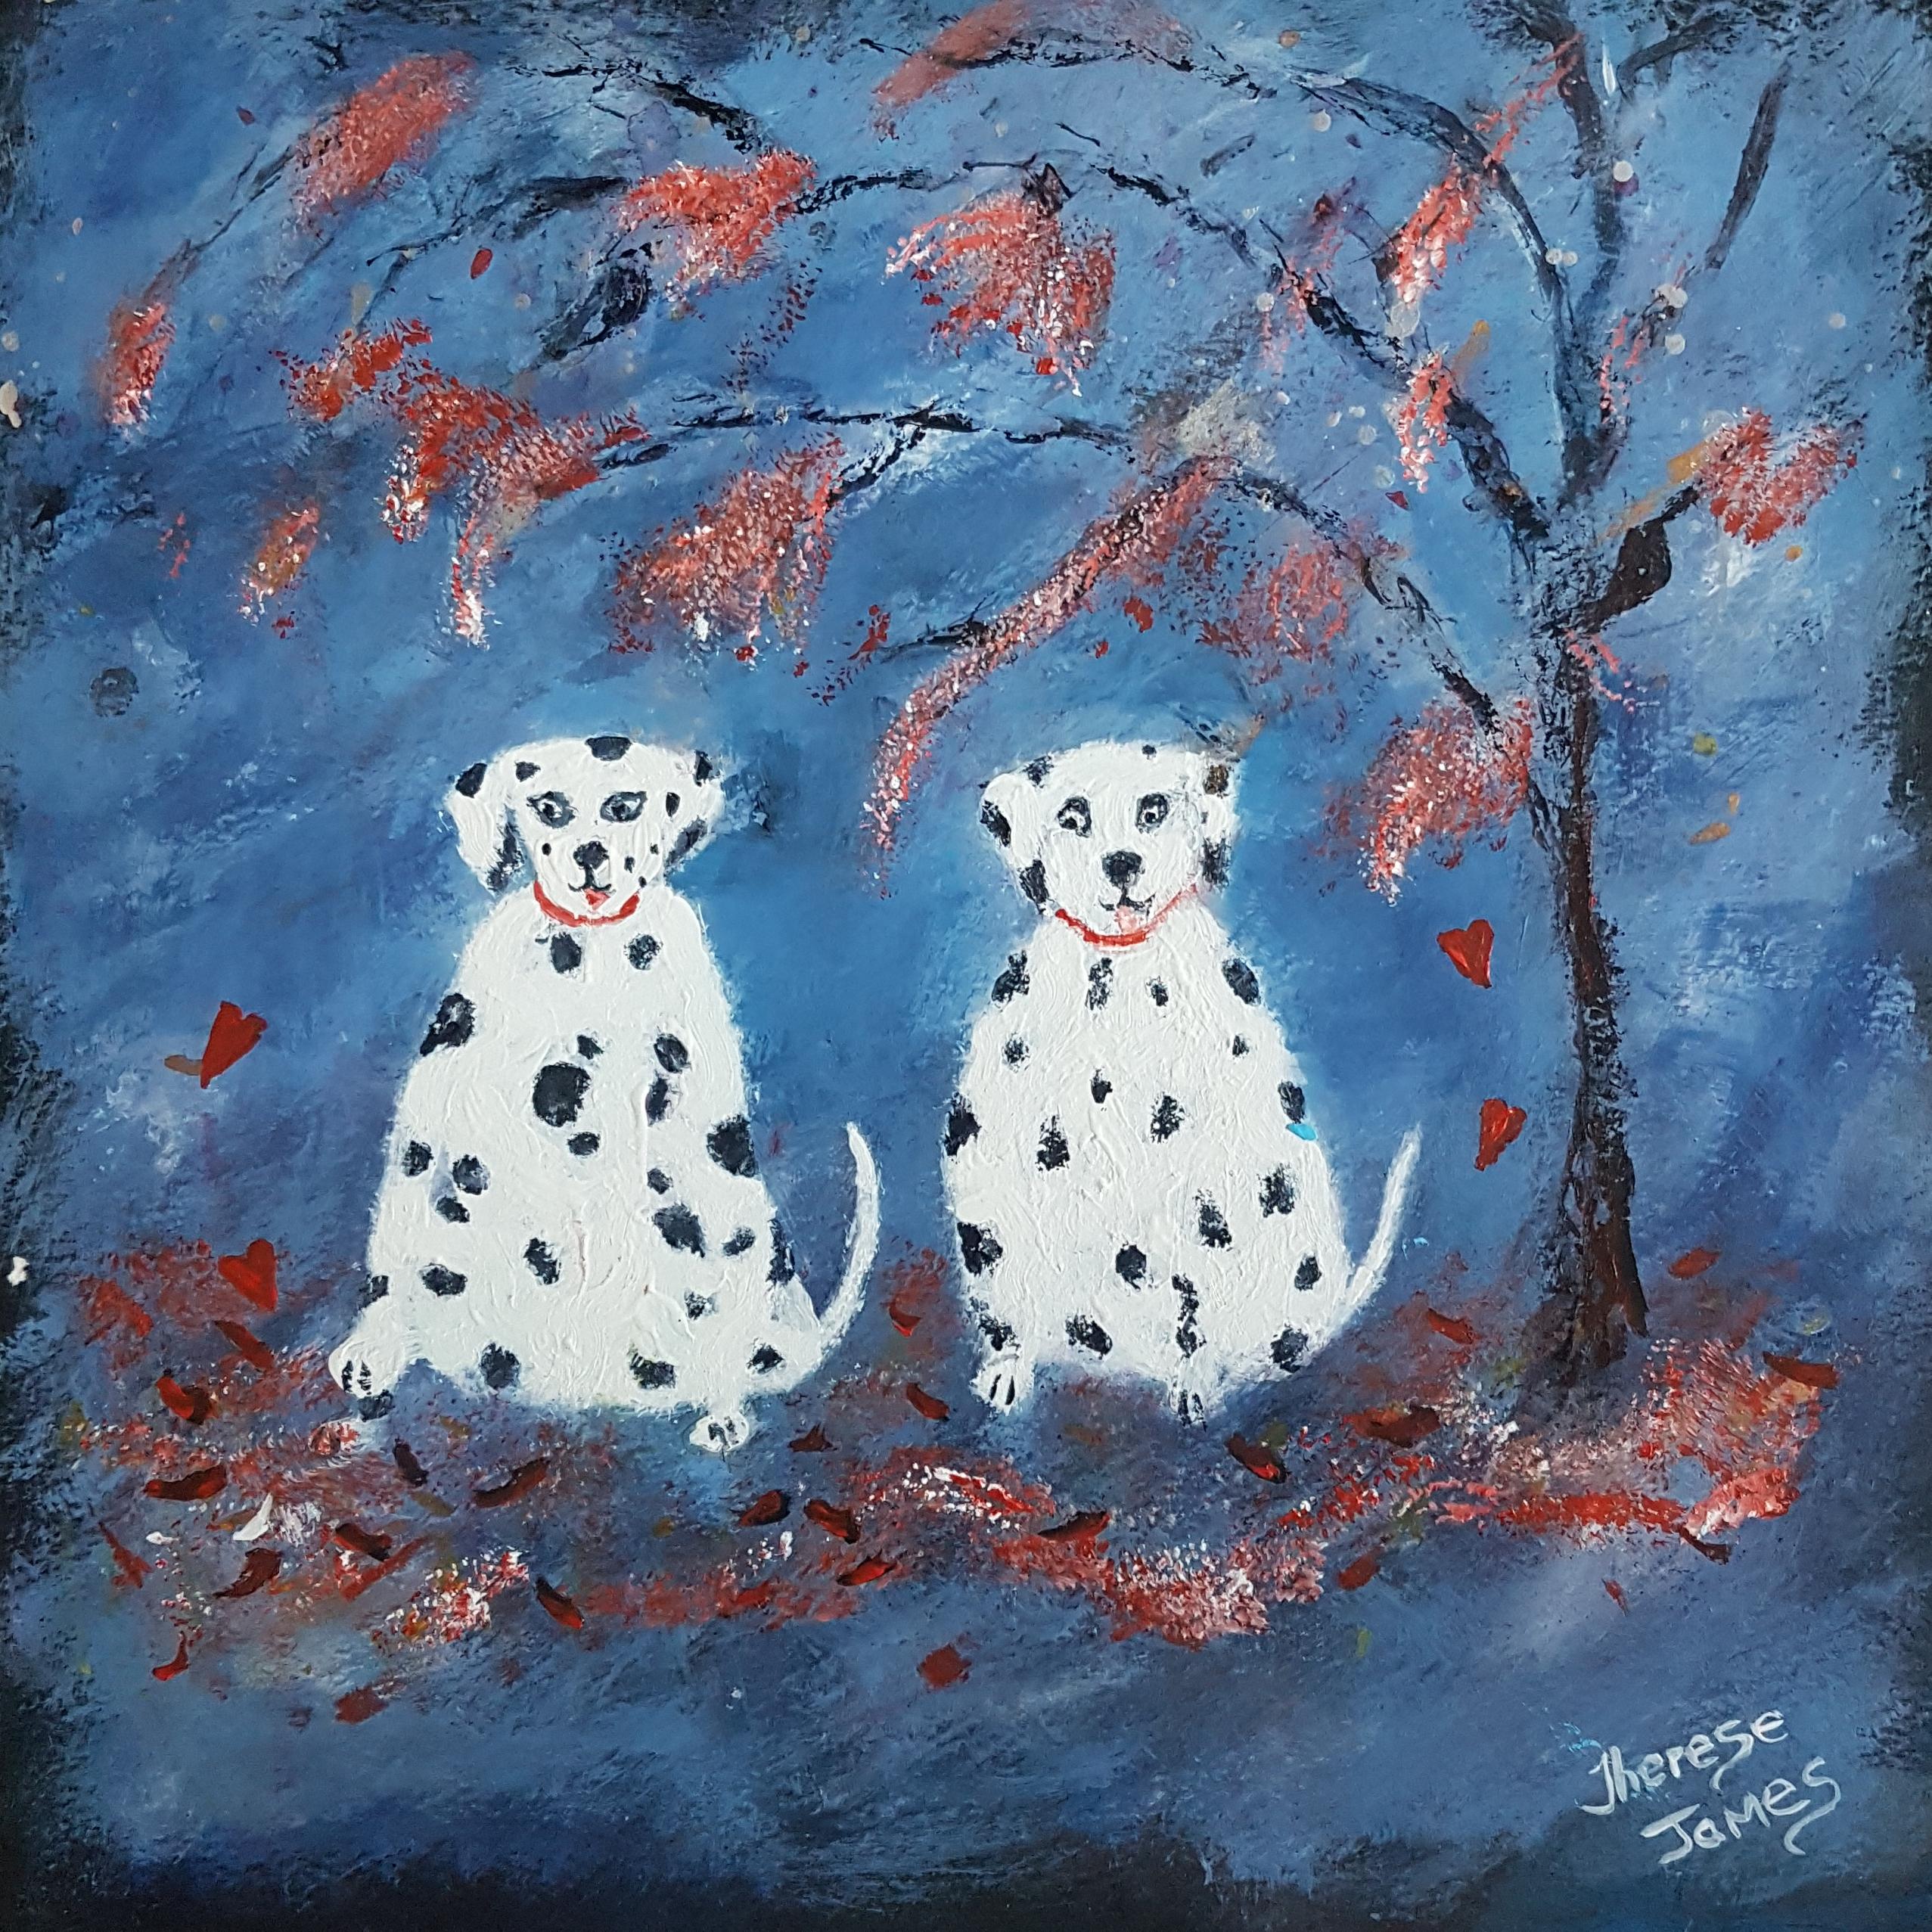 "Dotty Dogs" Contemporary Mixed Media on Paper Painting